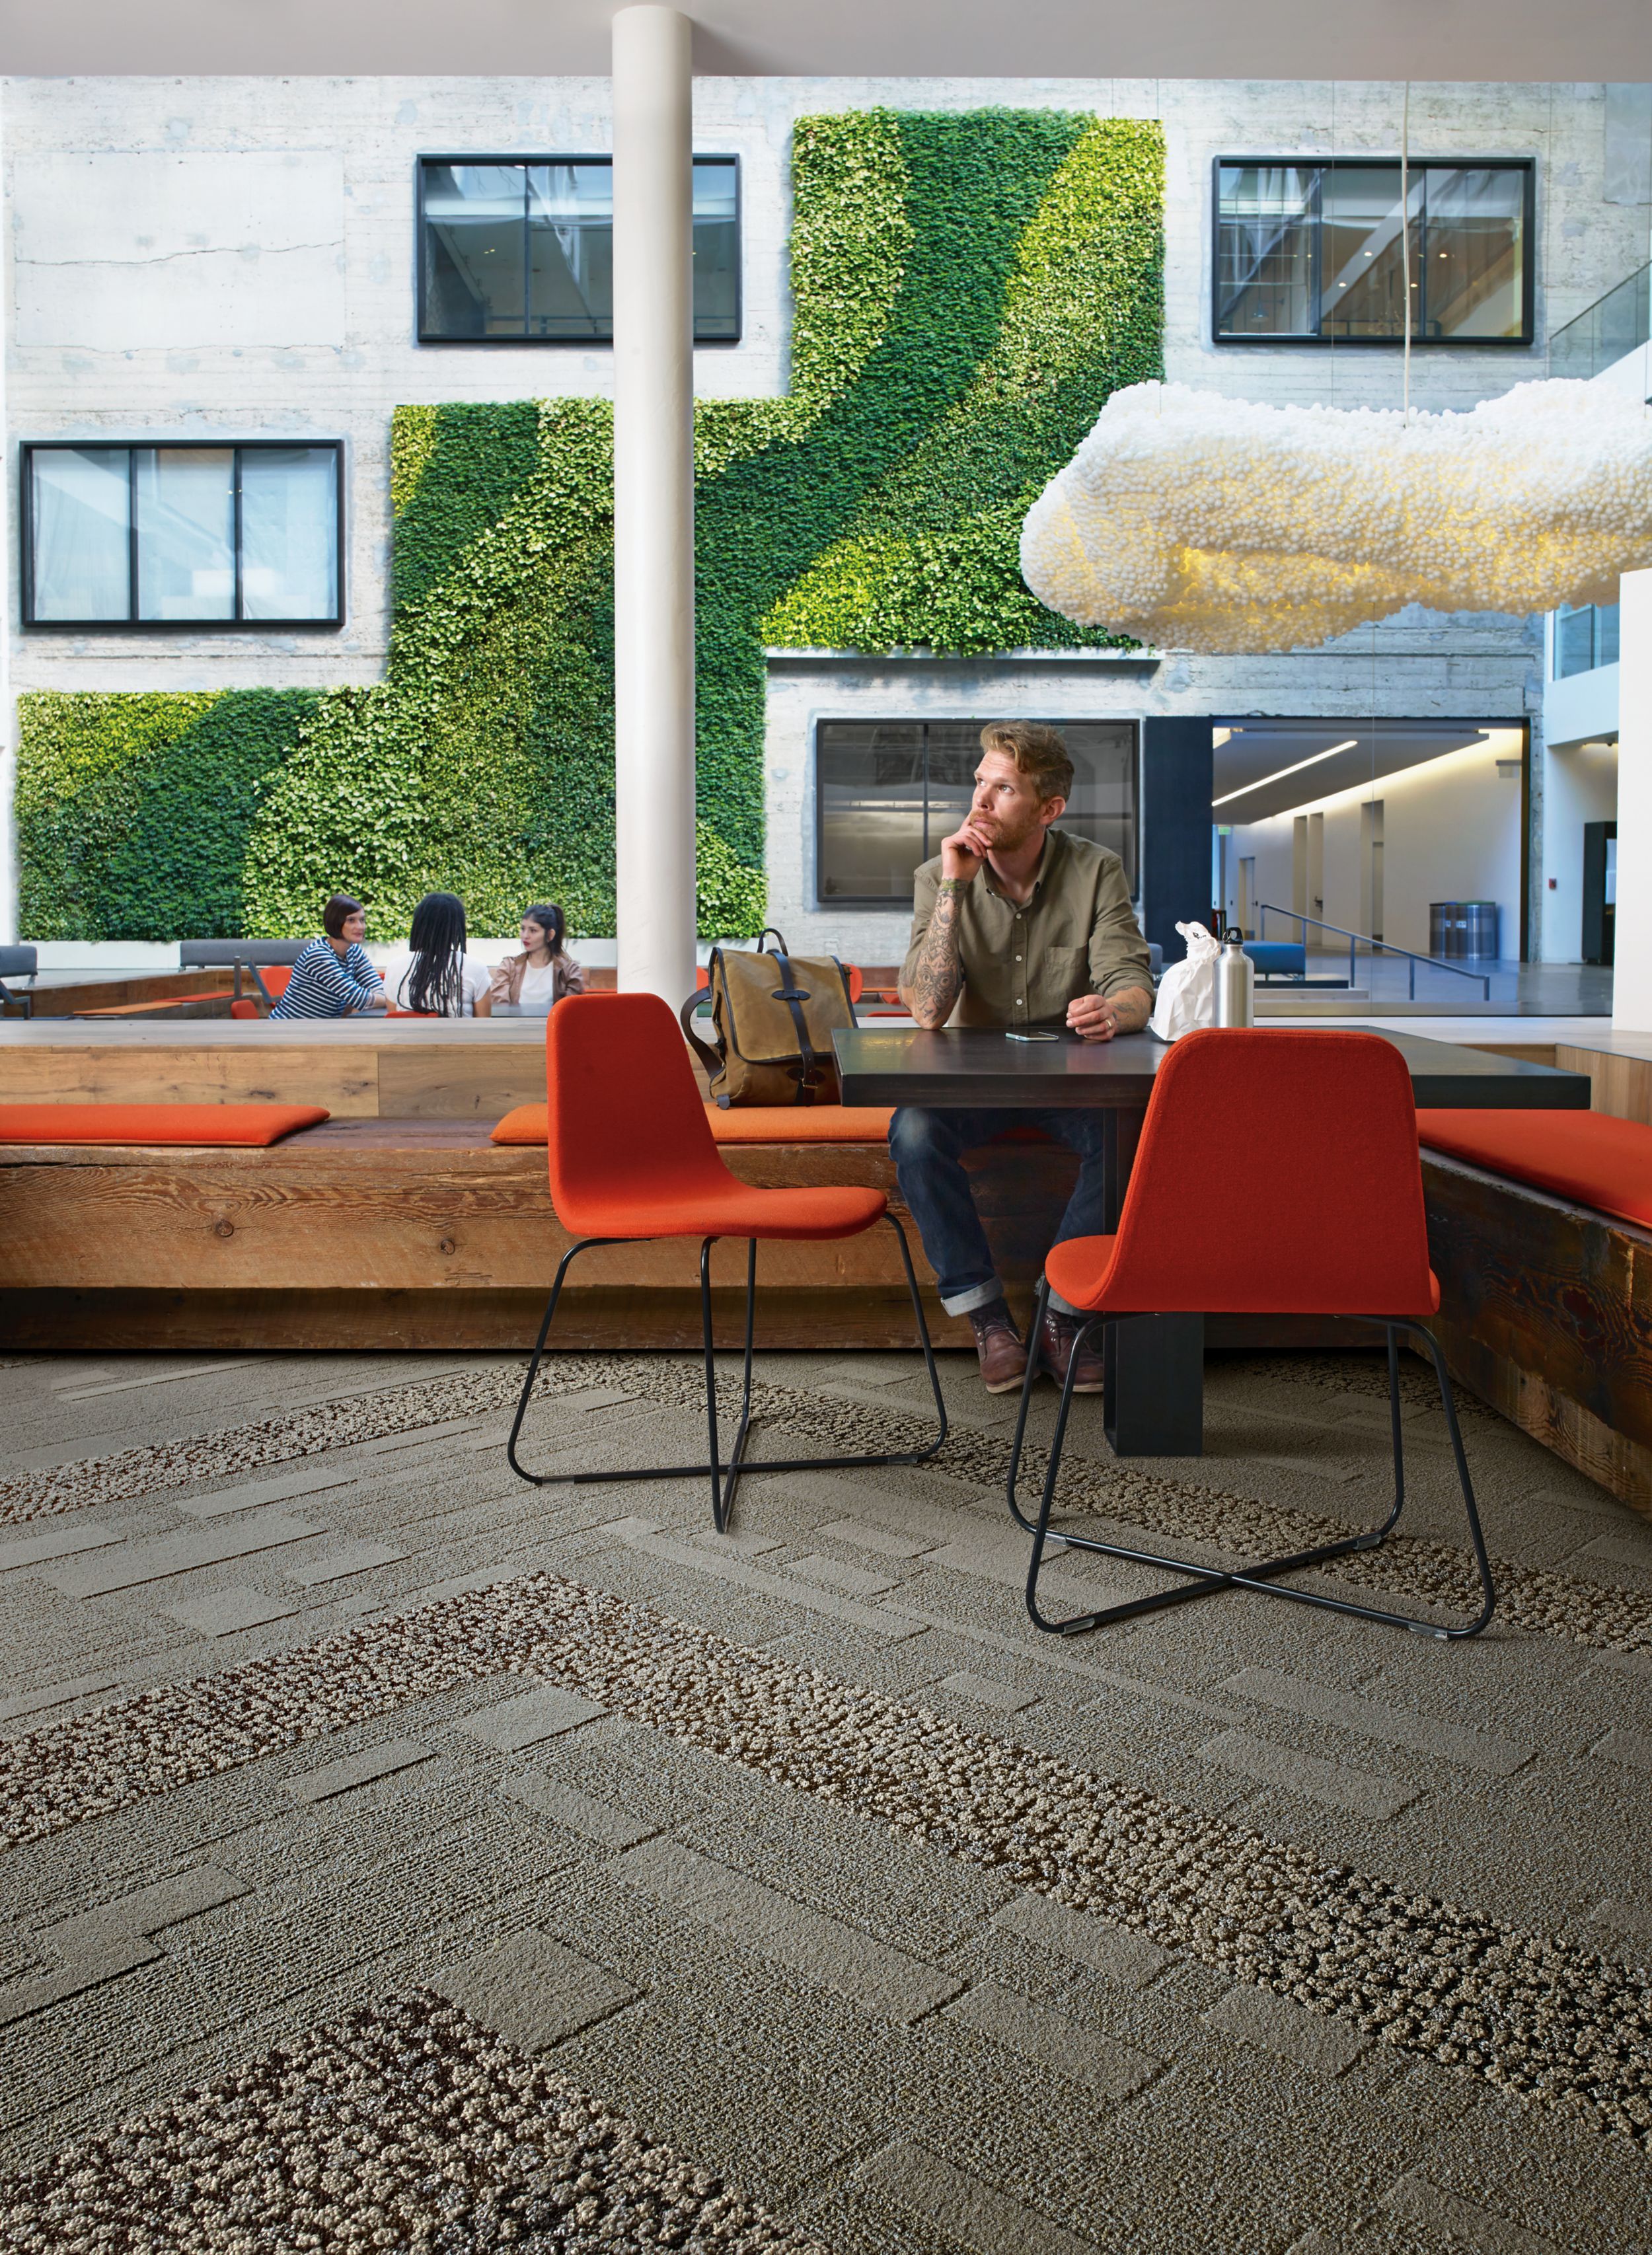 Interface EM552 plank carpet tile with man sitting at table with lunch and group meeting in front of vine wall in the background  imagen número 8